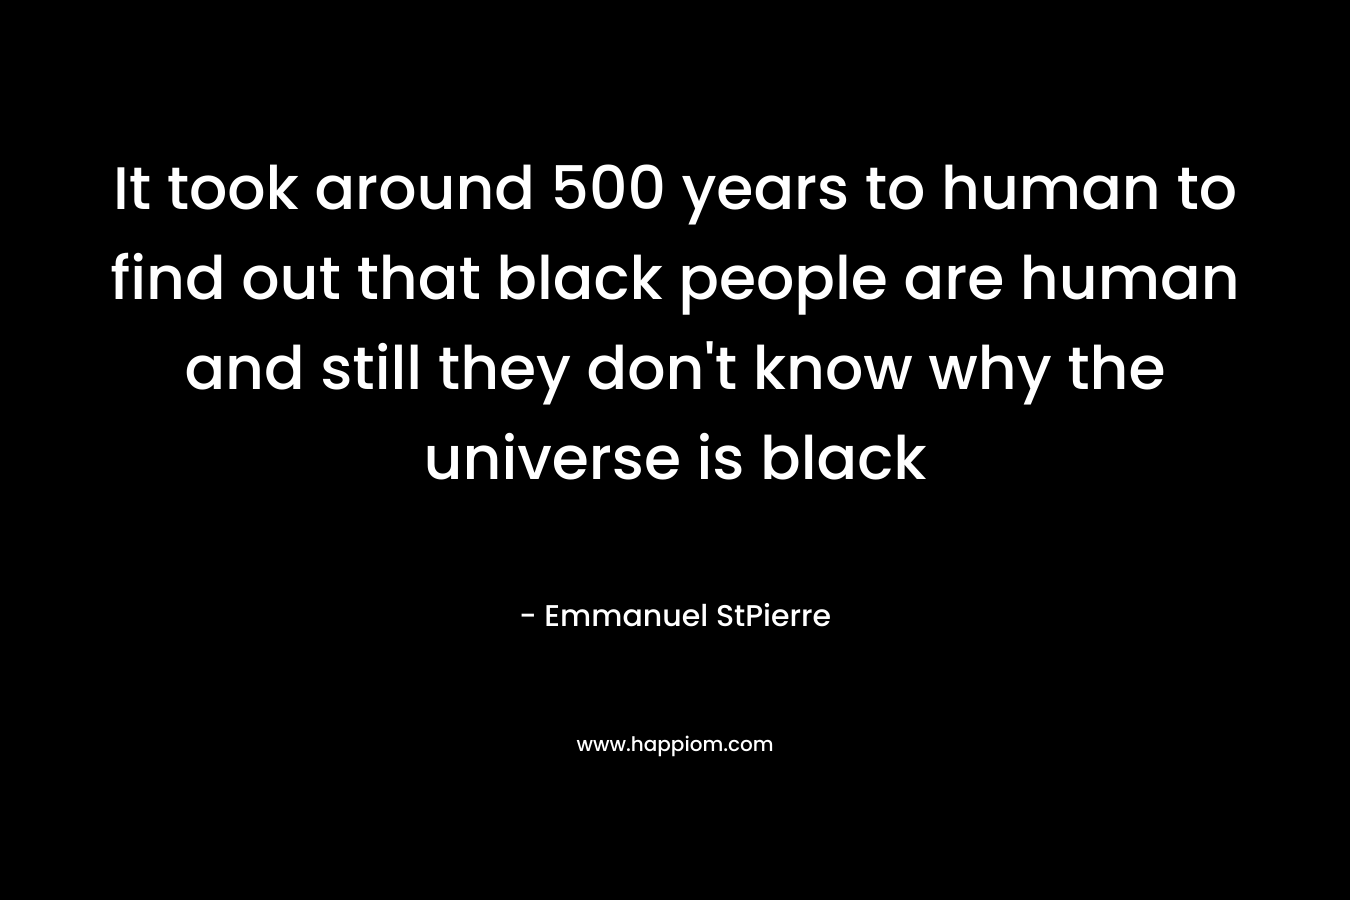 It took around 500 years to human to find out that black people are human and still they don't know why the universe is black